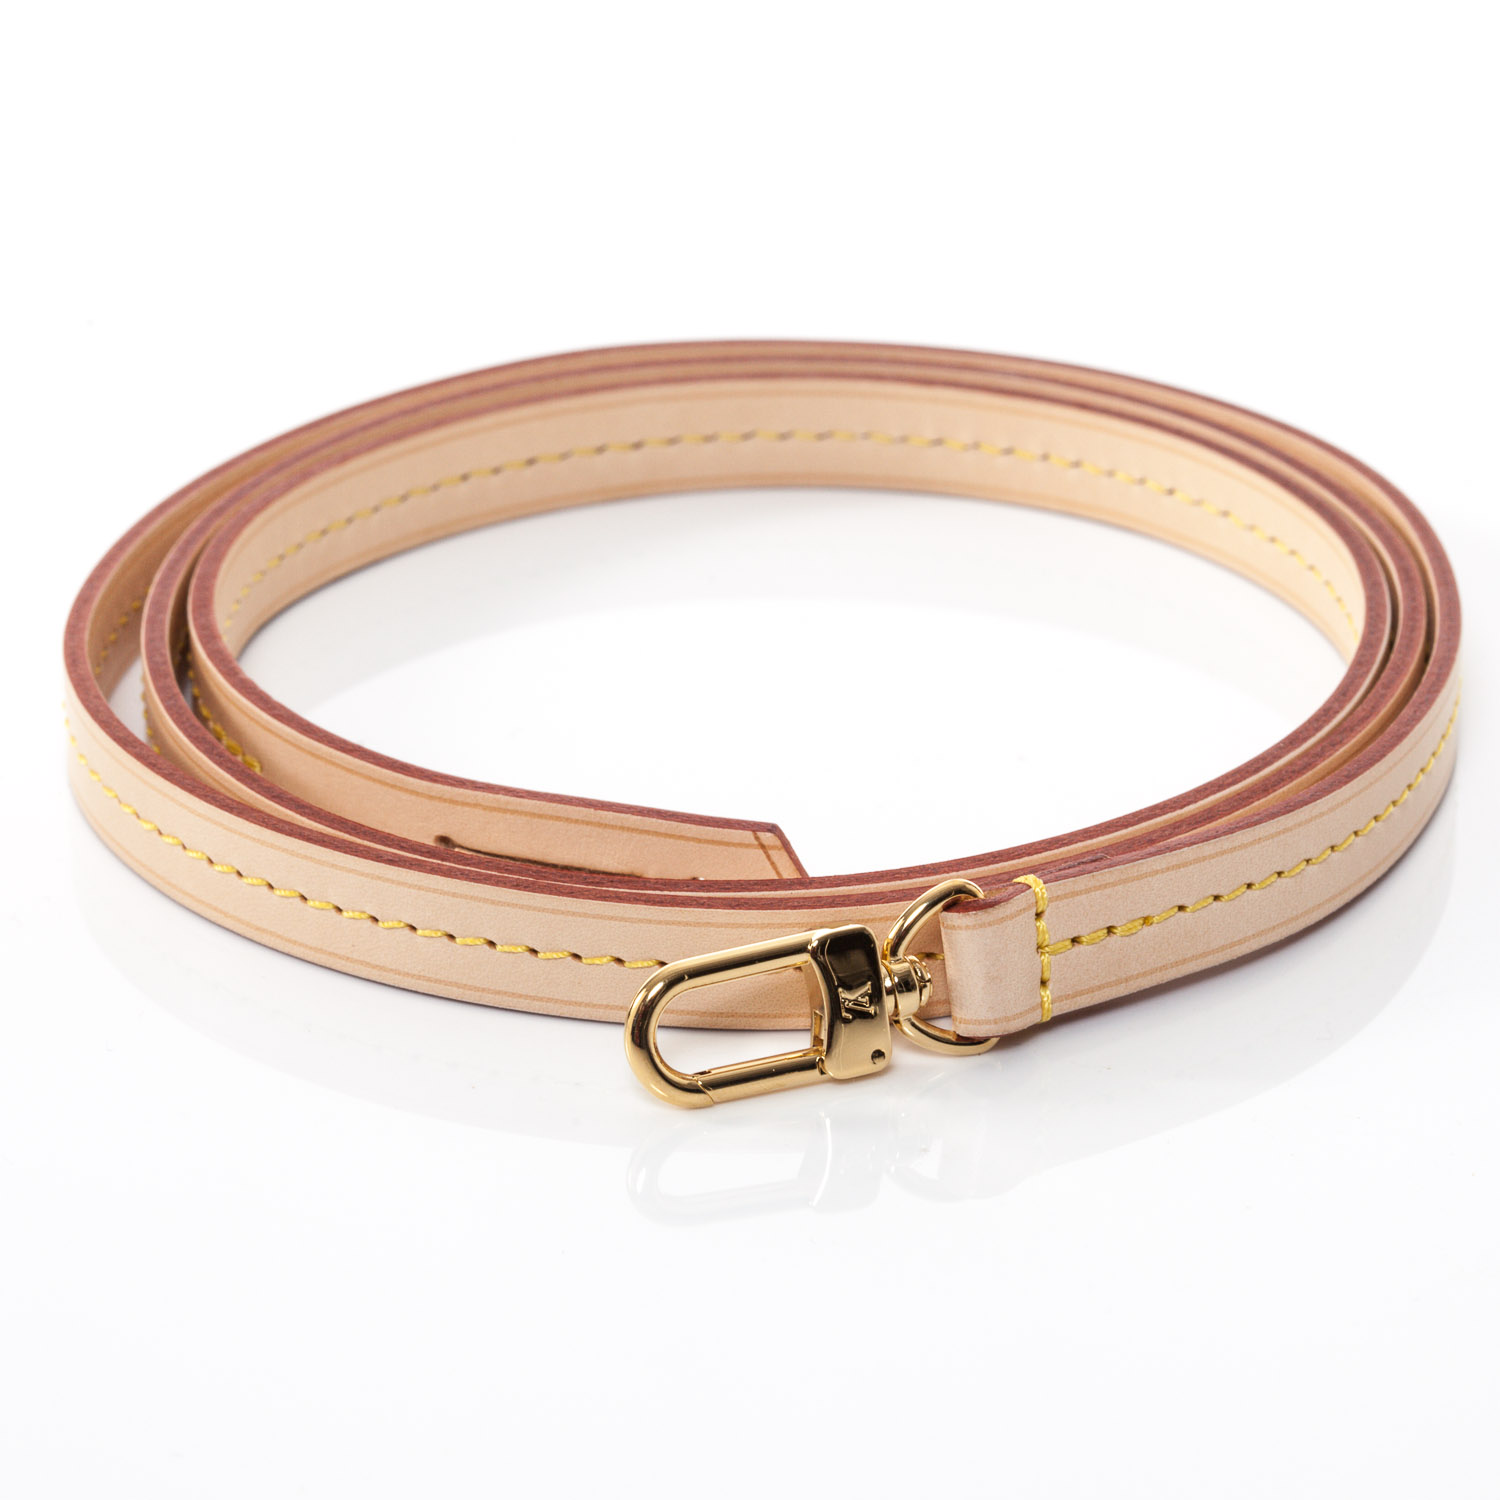 Louis Vuitton Bag Strap - 1,529 For Sale on 1stDibs  lv bag strap, louis  vuitton pink strap bag, lv strap bag